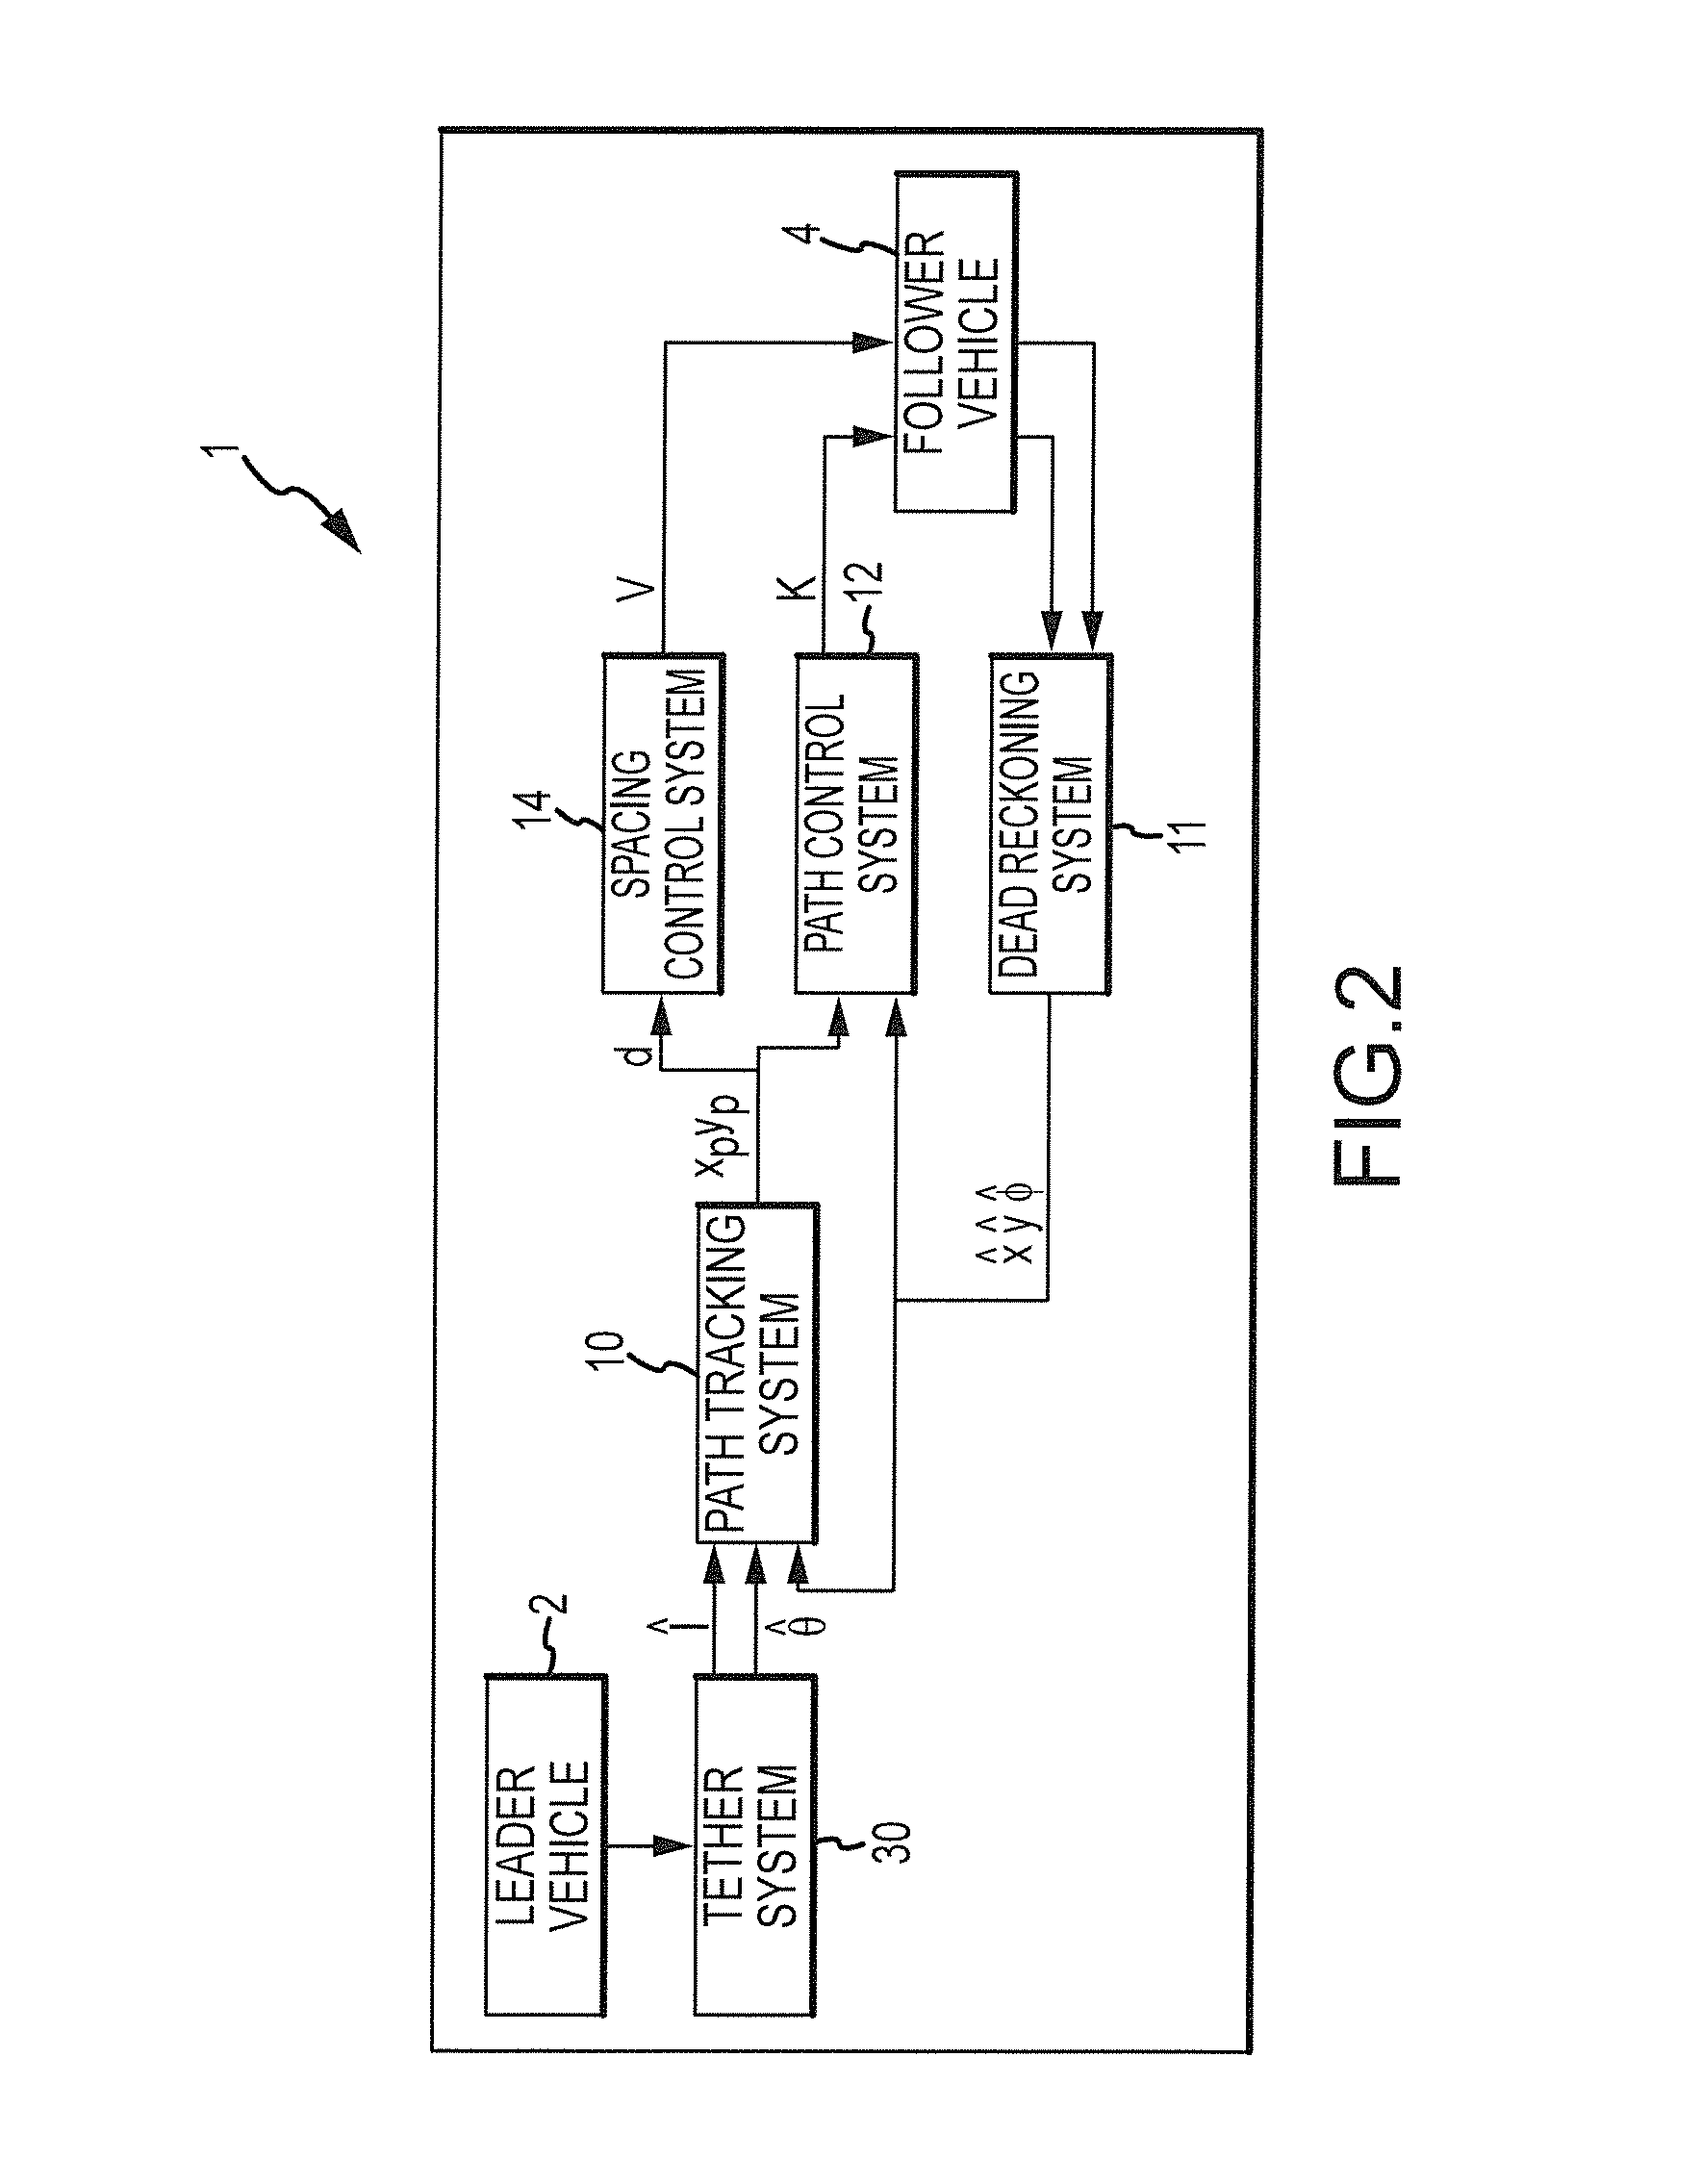 Follower vehicle control system and method for forward and reverse convoy movement